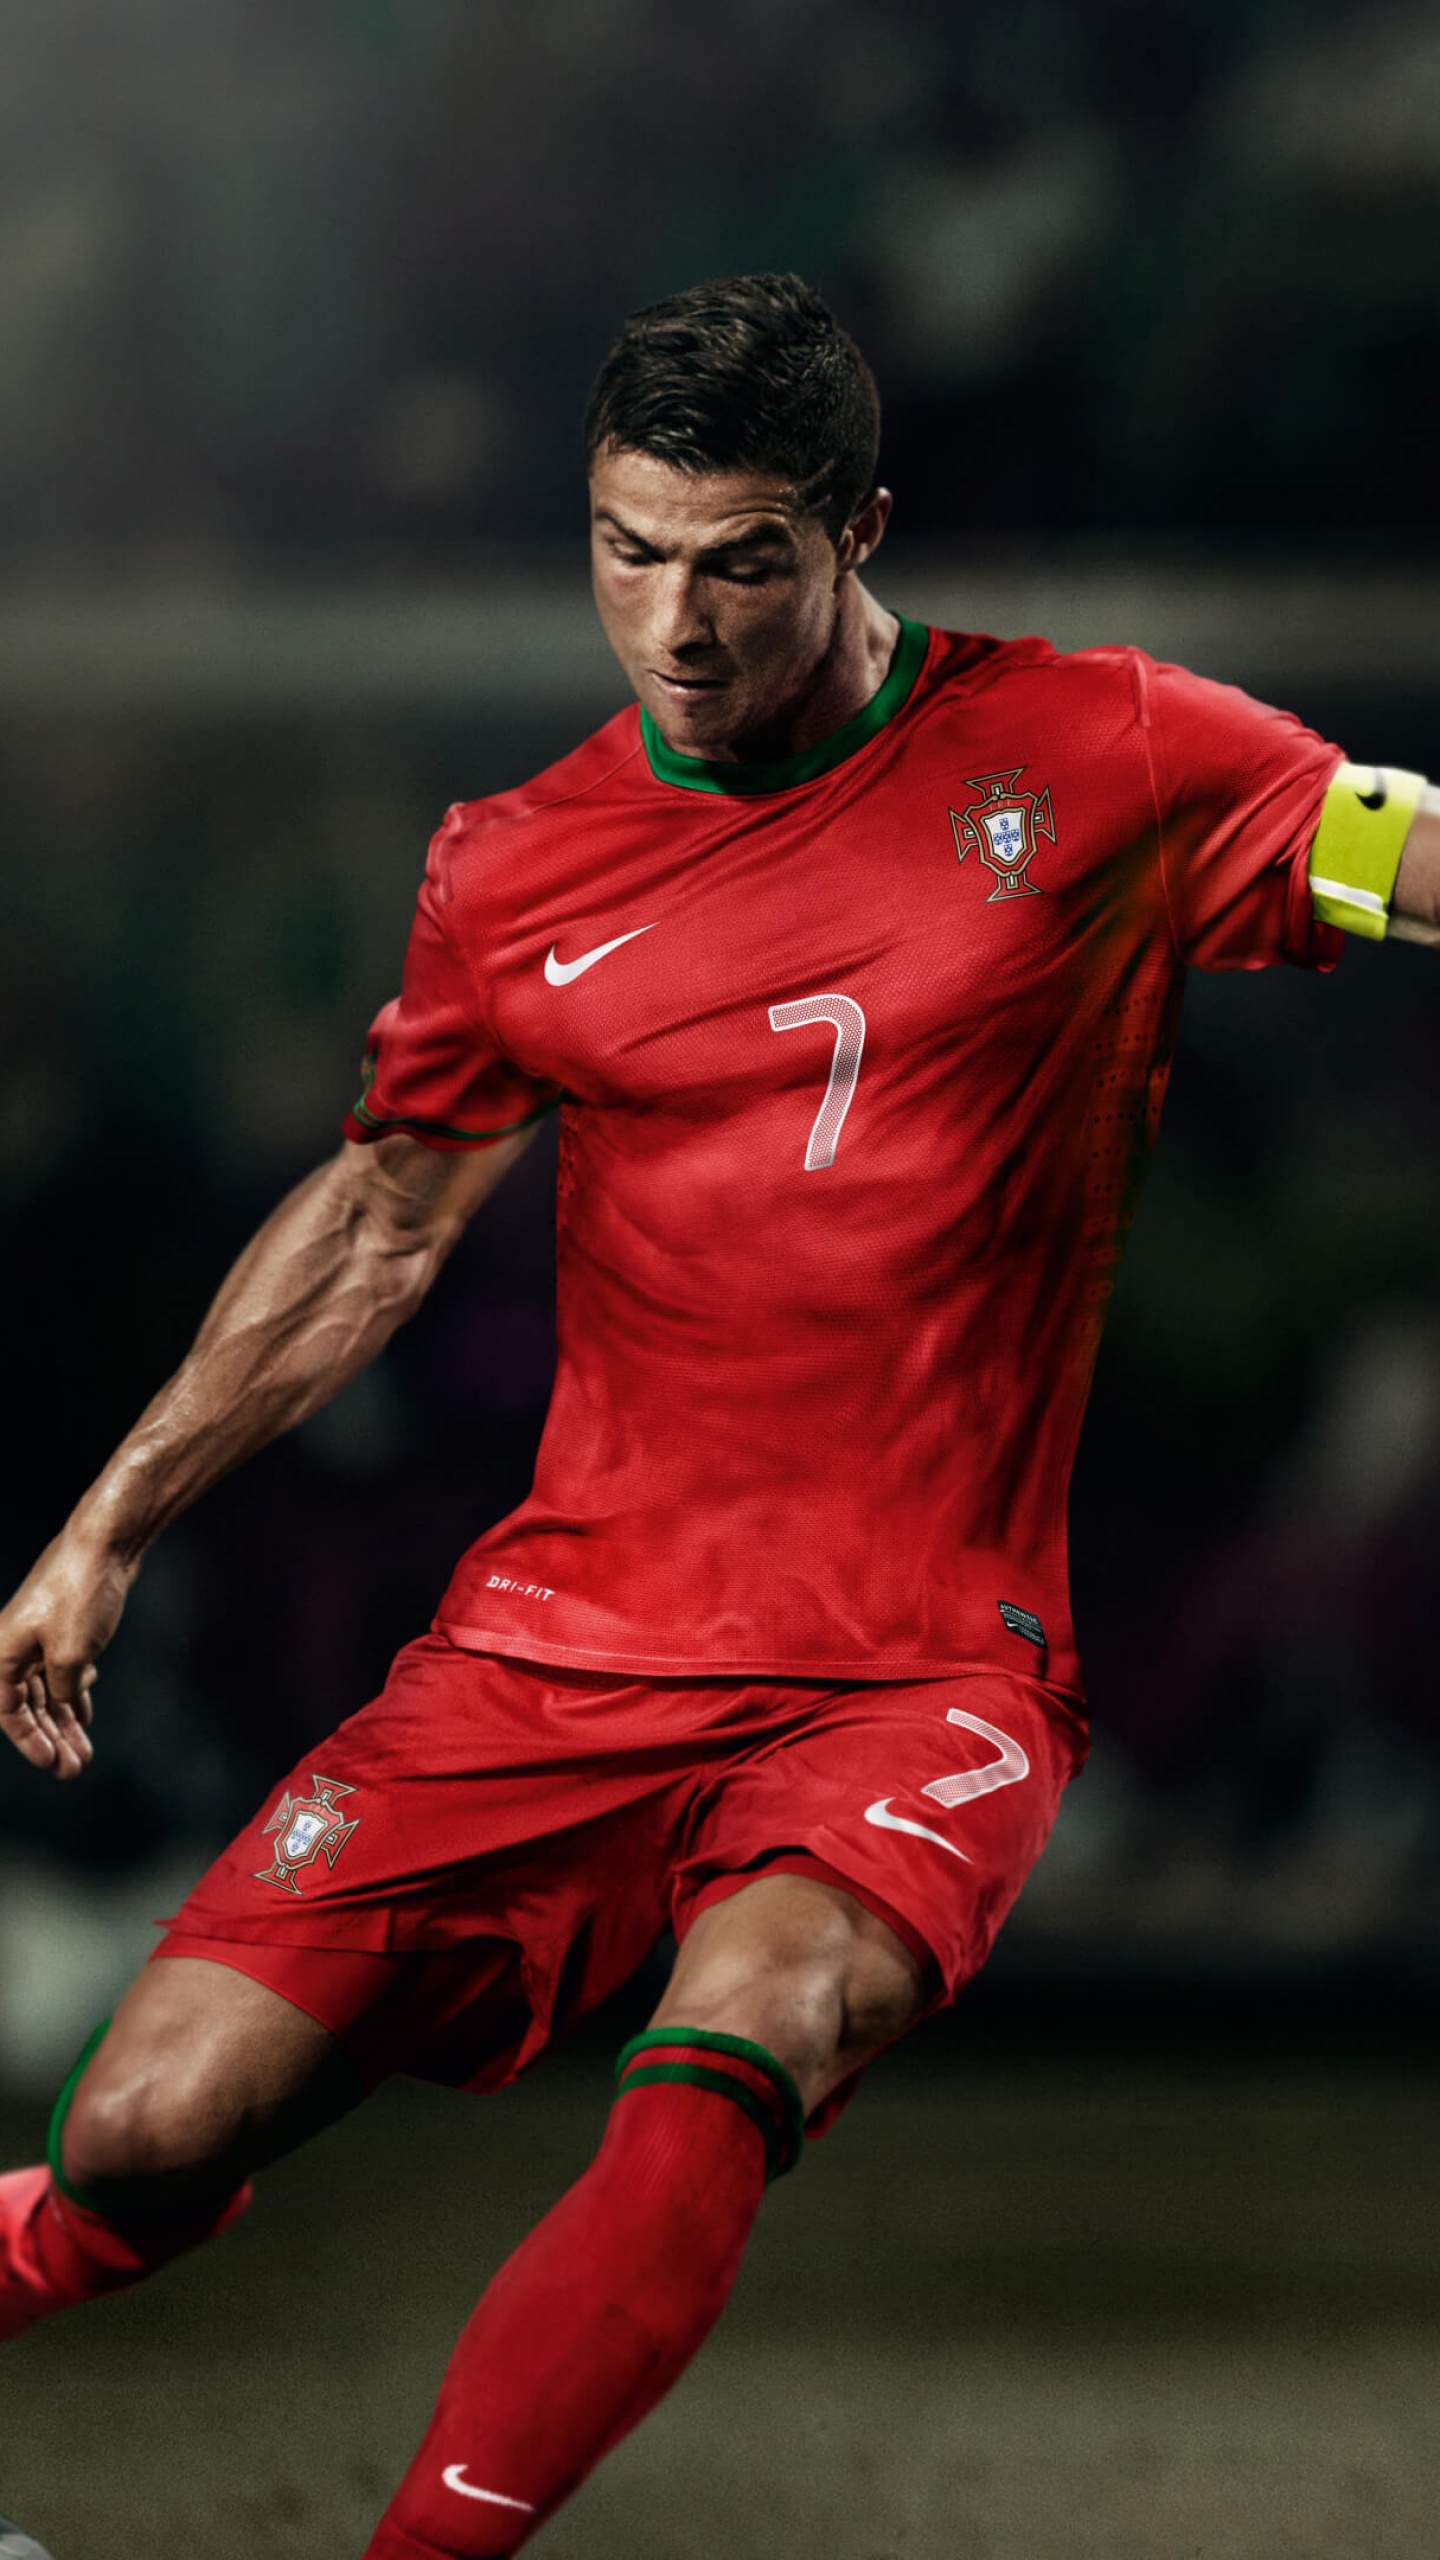 Soccer Football Player Cristiano Ronaldo Black Poster 18 Canvas Poster  Bedroom Decor Sports Landscape Office Room Decor Gift  Unframe-style112×18inch(30×45cm) : Amazon.co.uk: Home & Kitchen